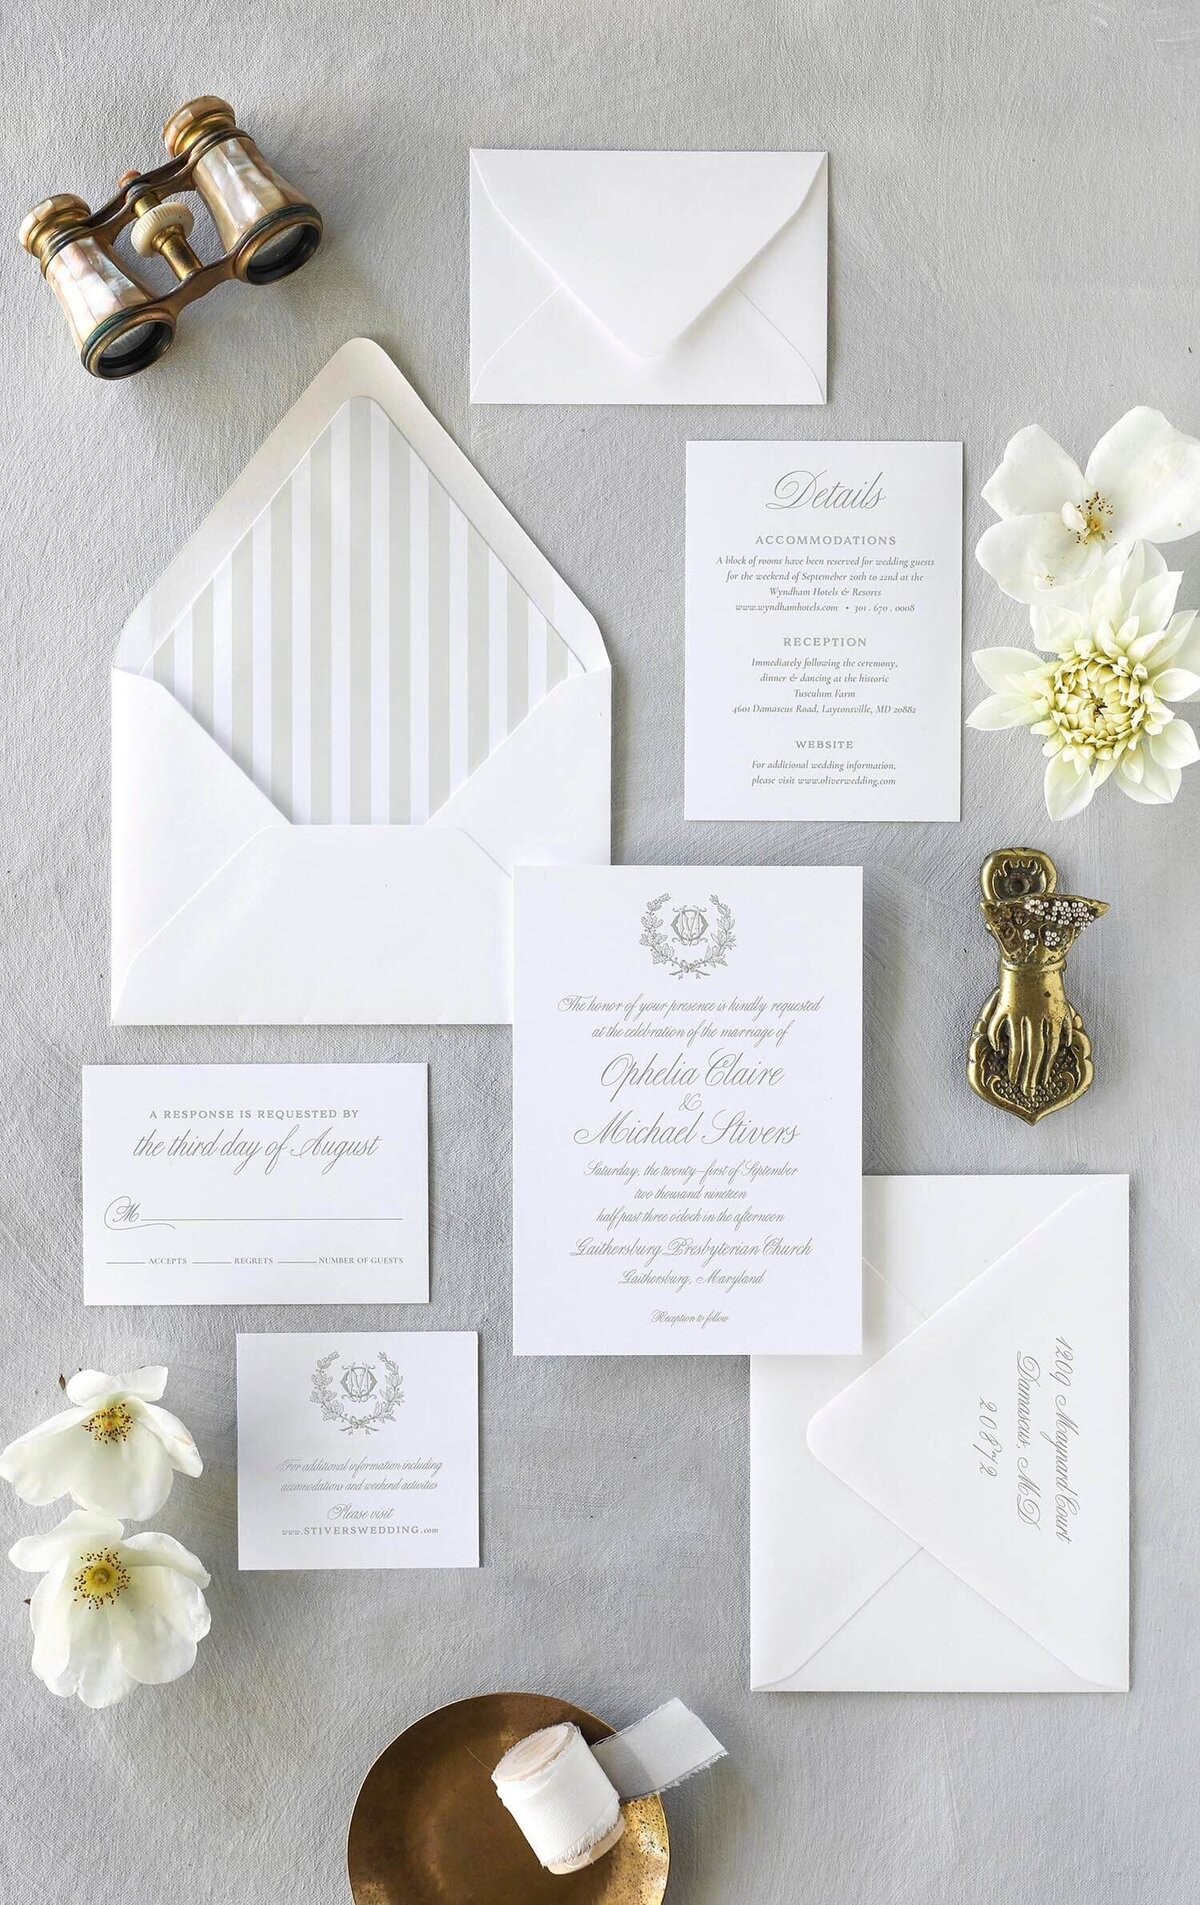 Classic wedding invitation suite with white florals and brass details